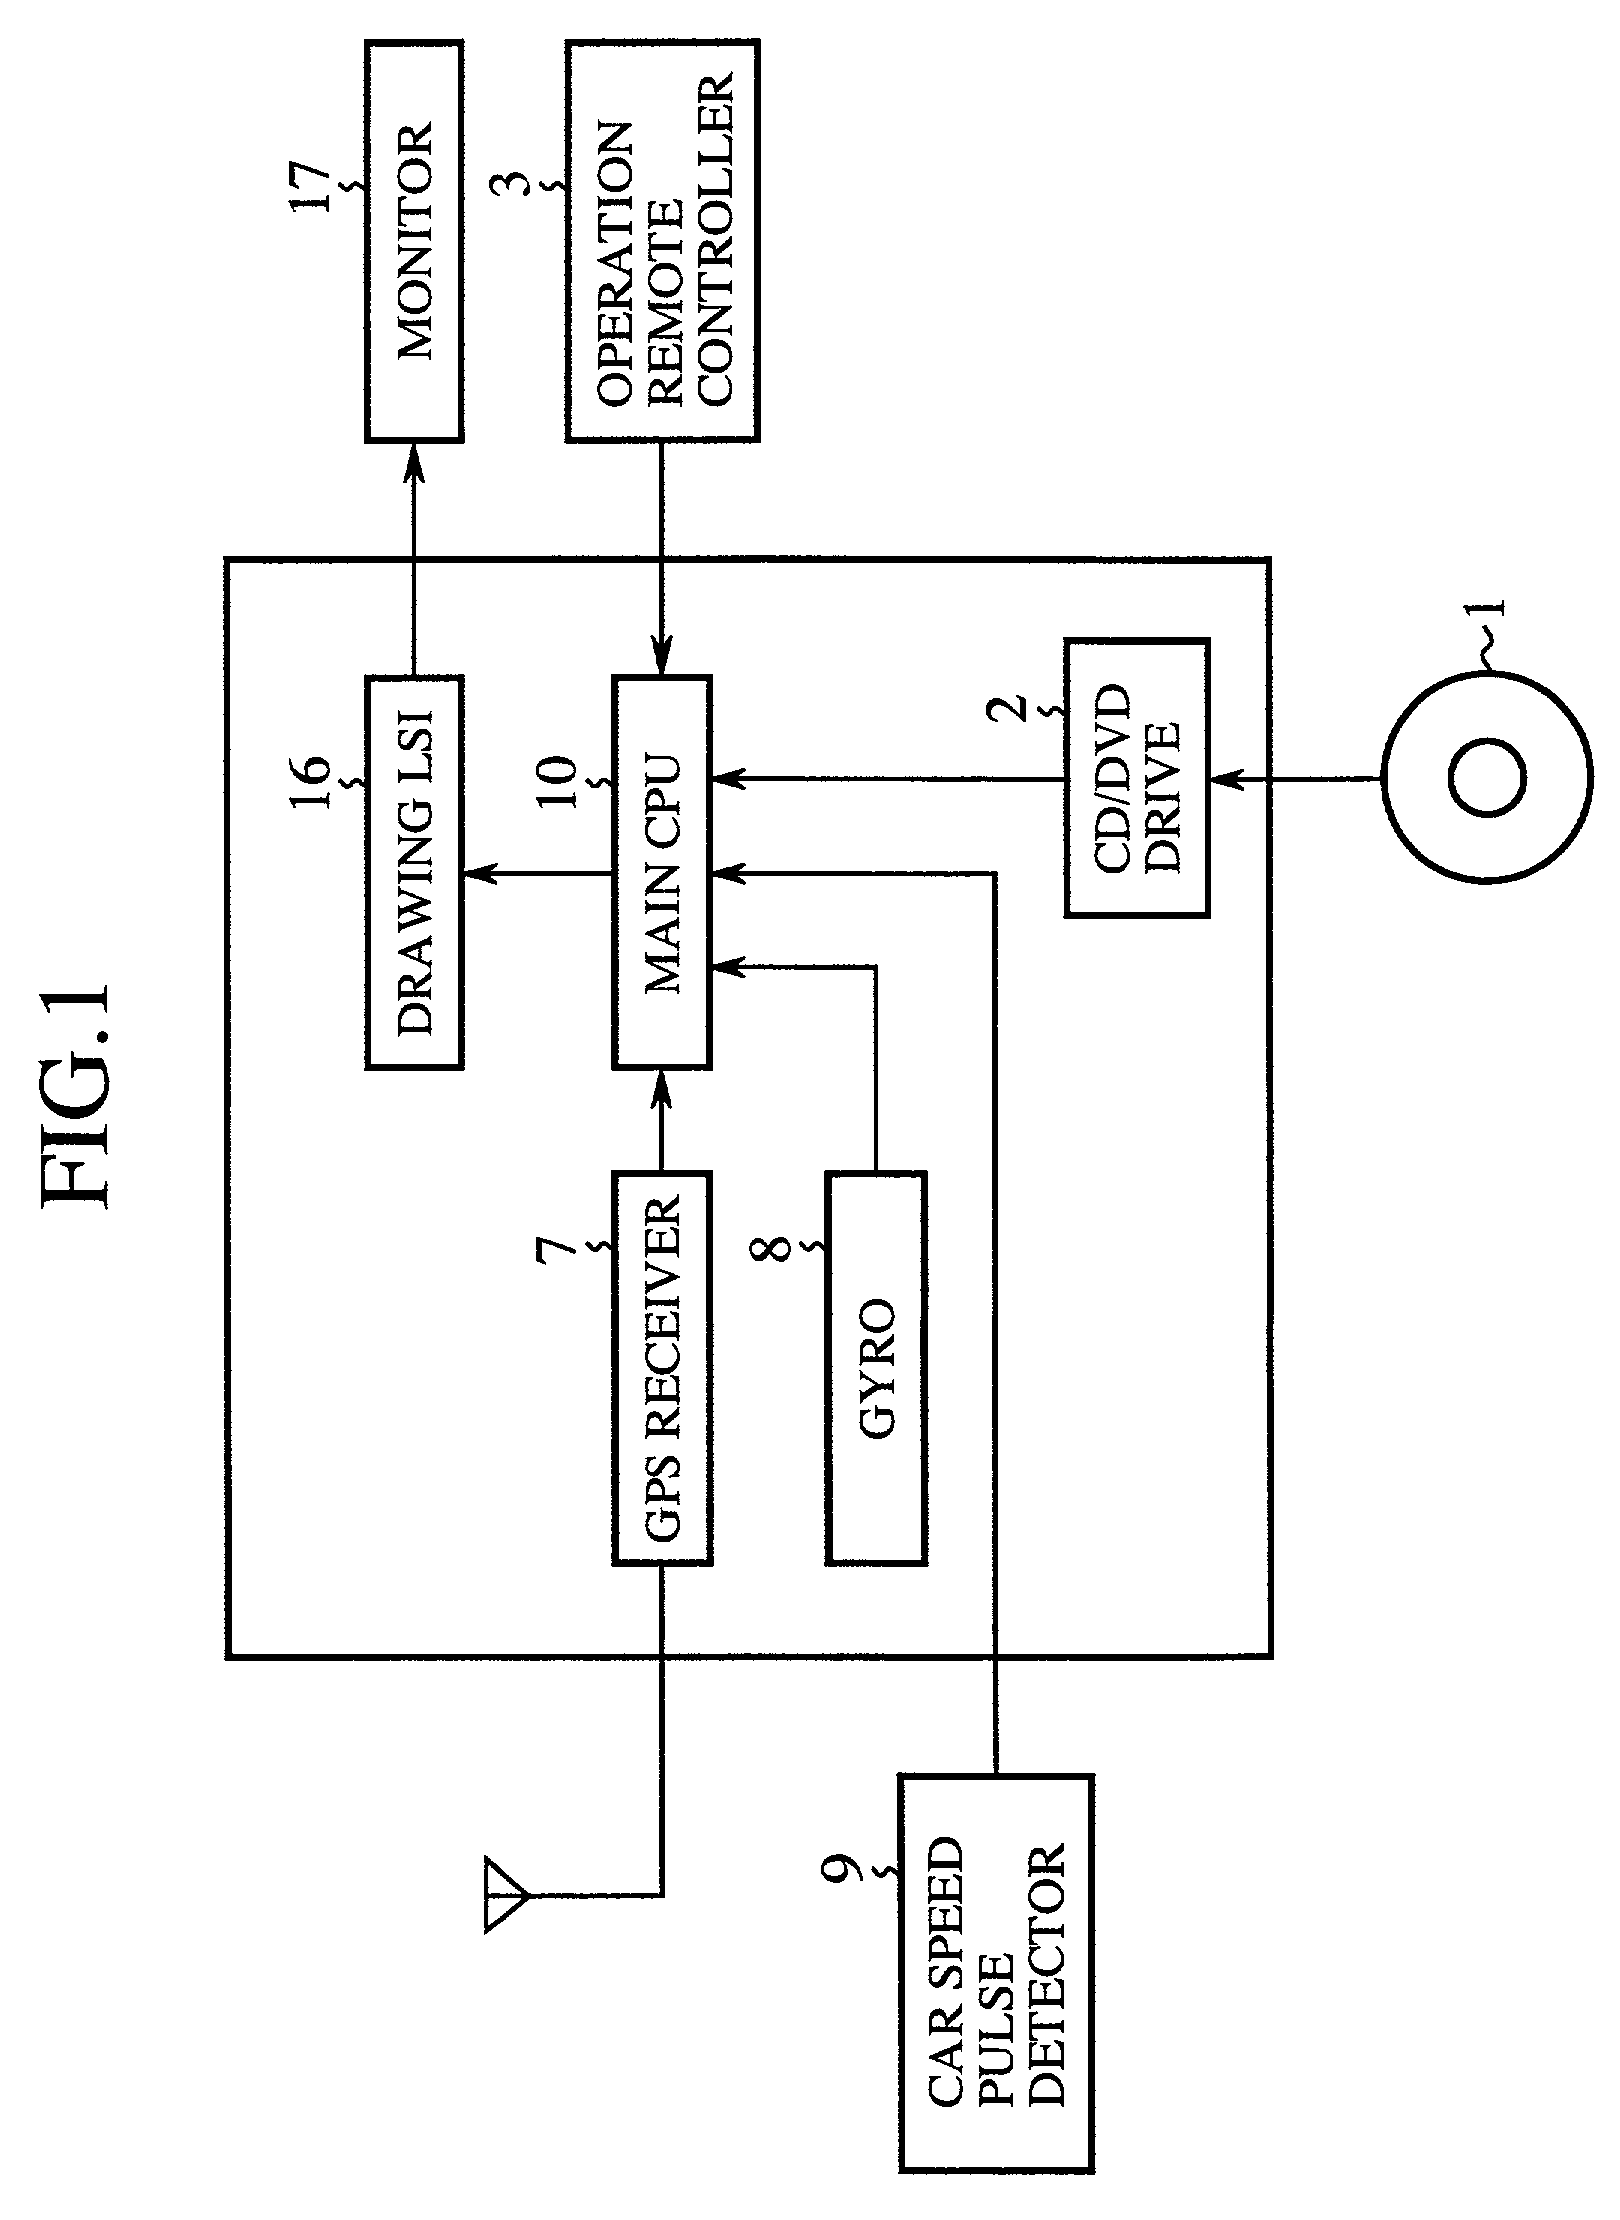 Navigation device for displaying dated map data